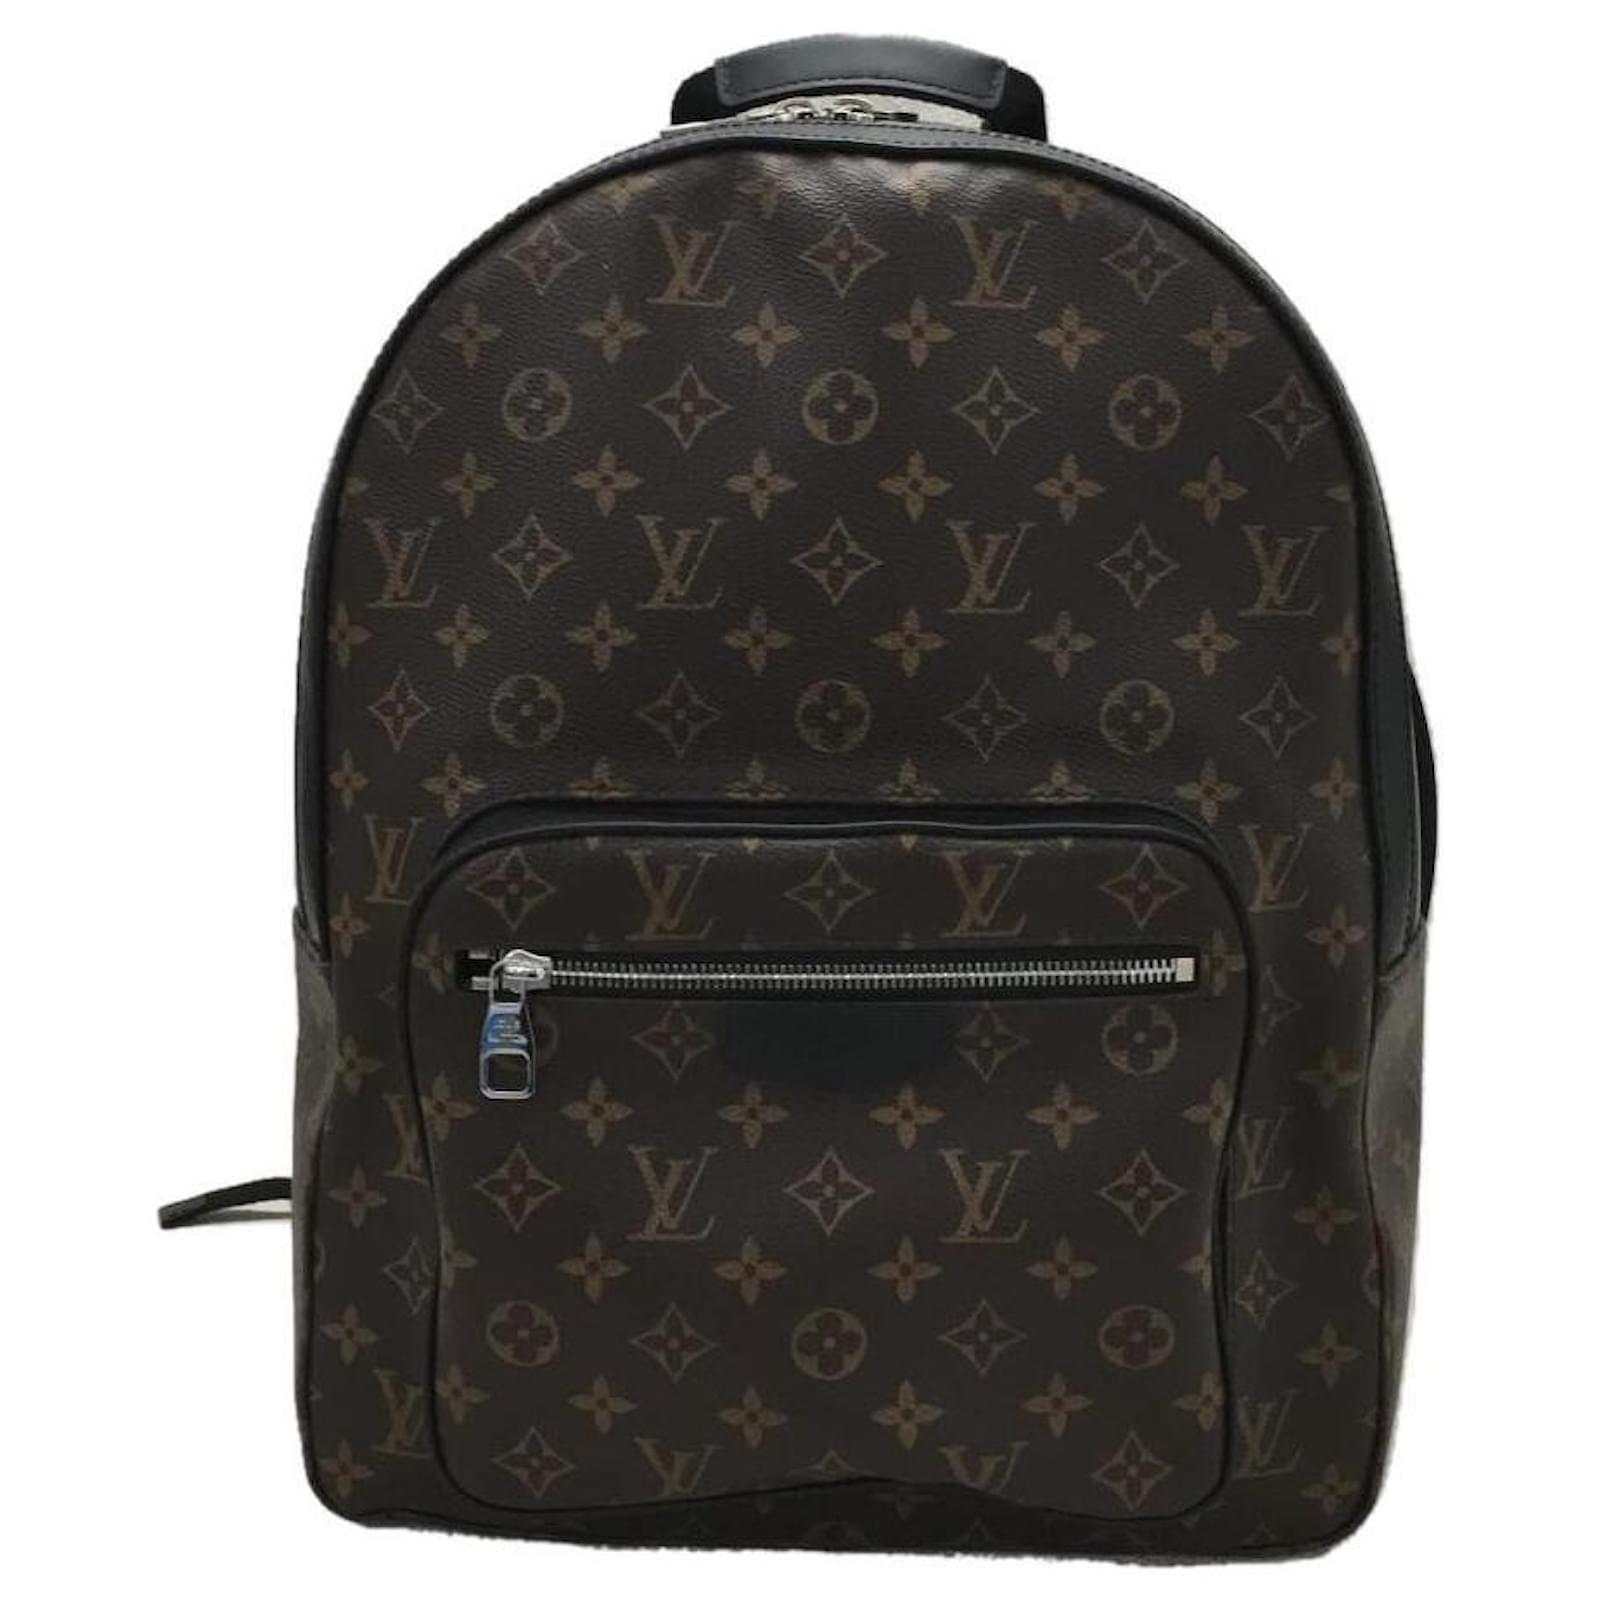 L V BACKPACK Medium Size ACTUAL PICTURE